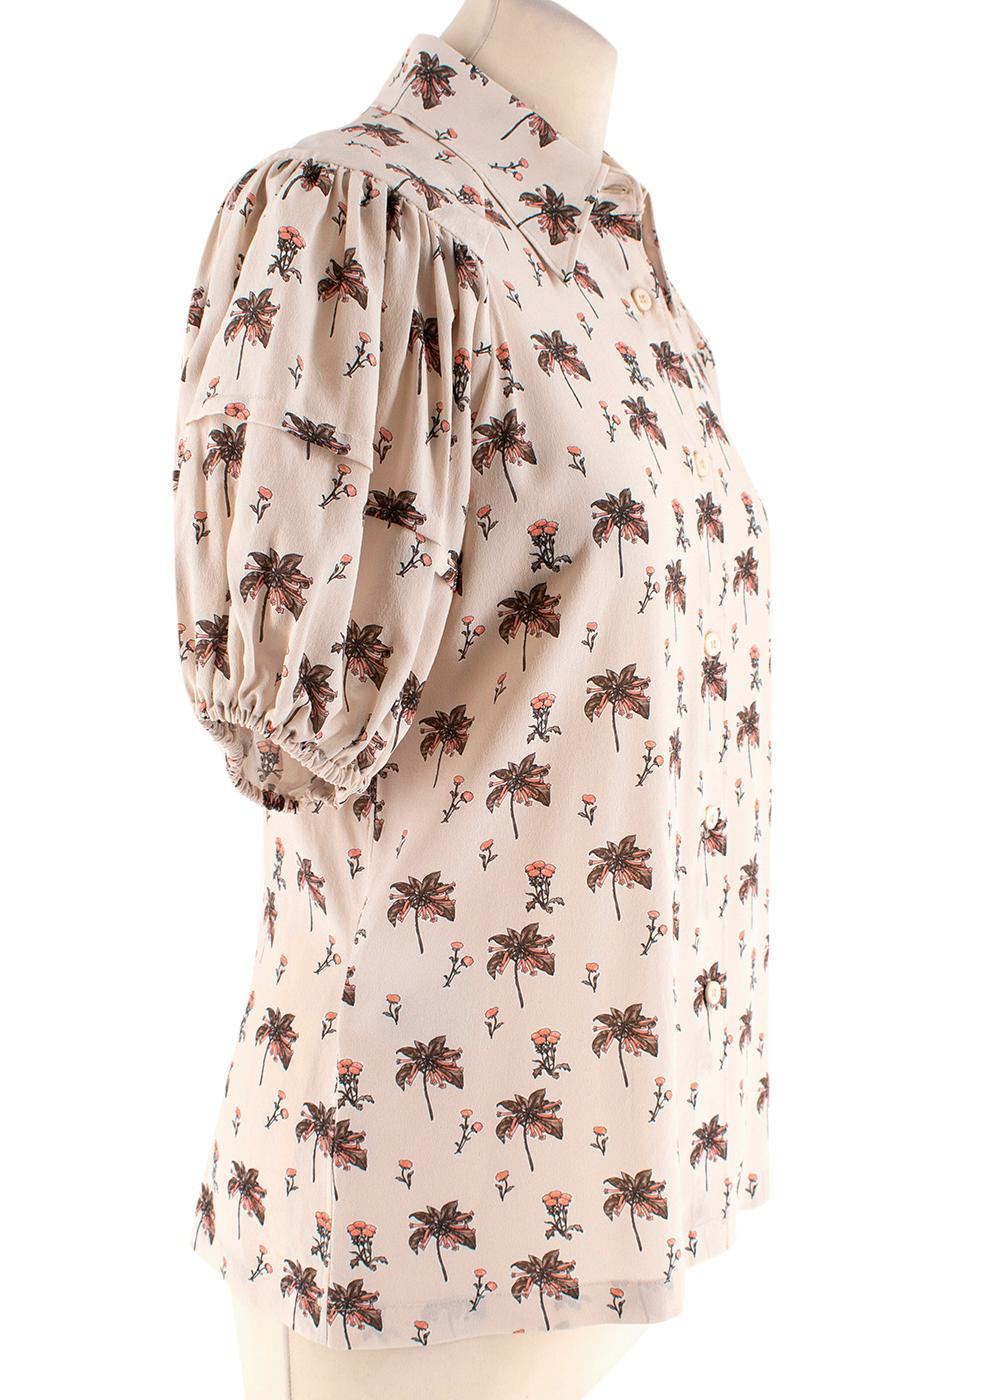 Prada Nude Silk Printed Puffed Sleeve Buttoned Blouse

- Soft silk design 
- Nude floral print 
- Gentle puff sleeves
- Pointed collar
- Front buttoned fastening

Materials: 
100% Silk

Dry Clean Only 

Made in China 

Shoulders - 37cm
Sleeves -